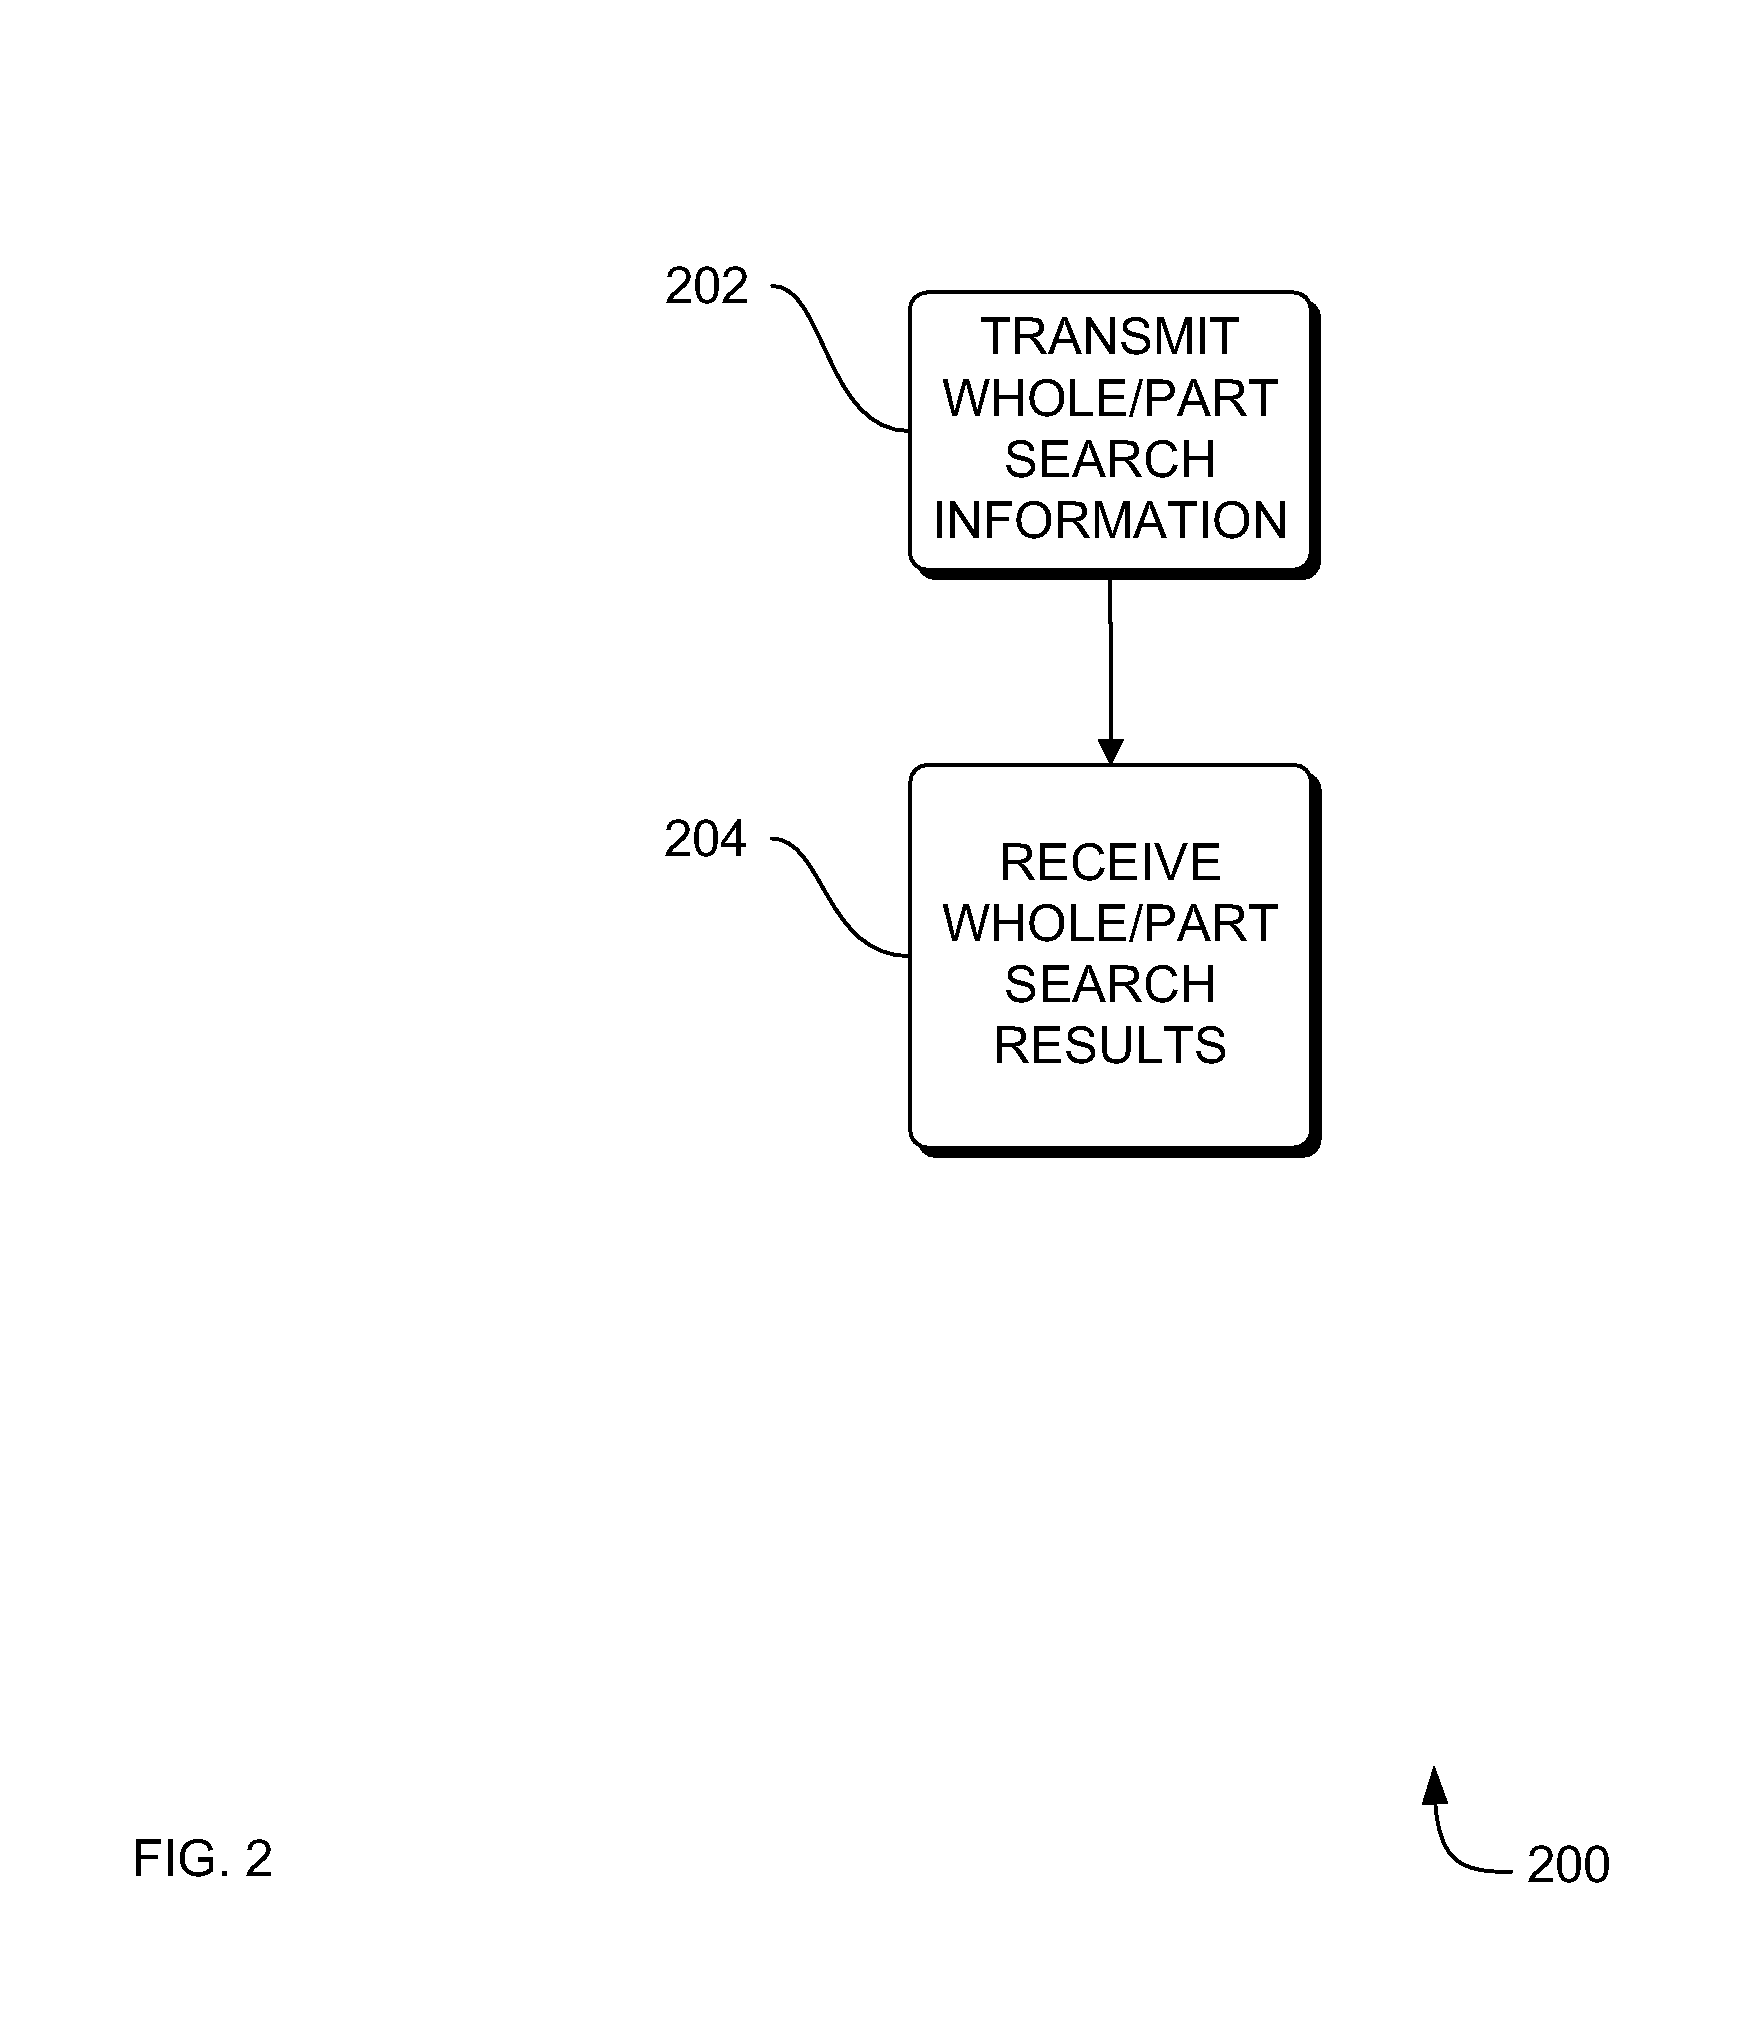 Systems, methods and apparatus of a whole/part search engine